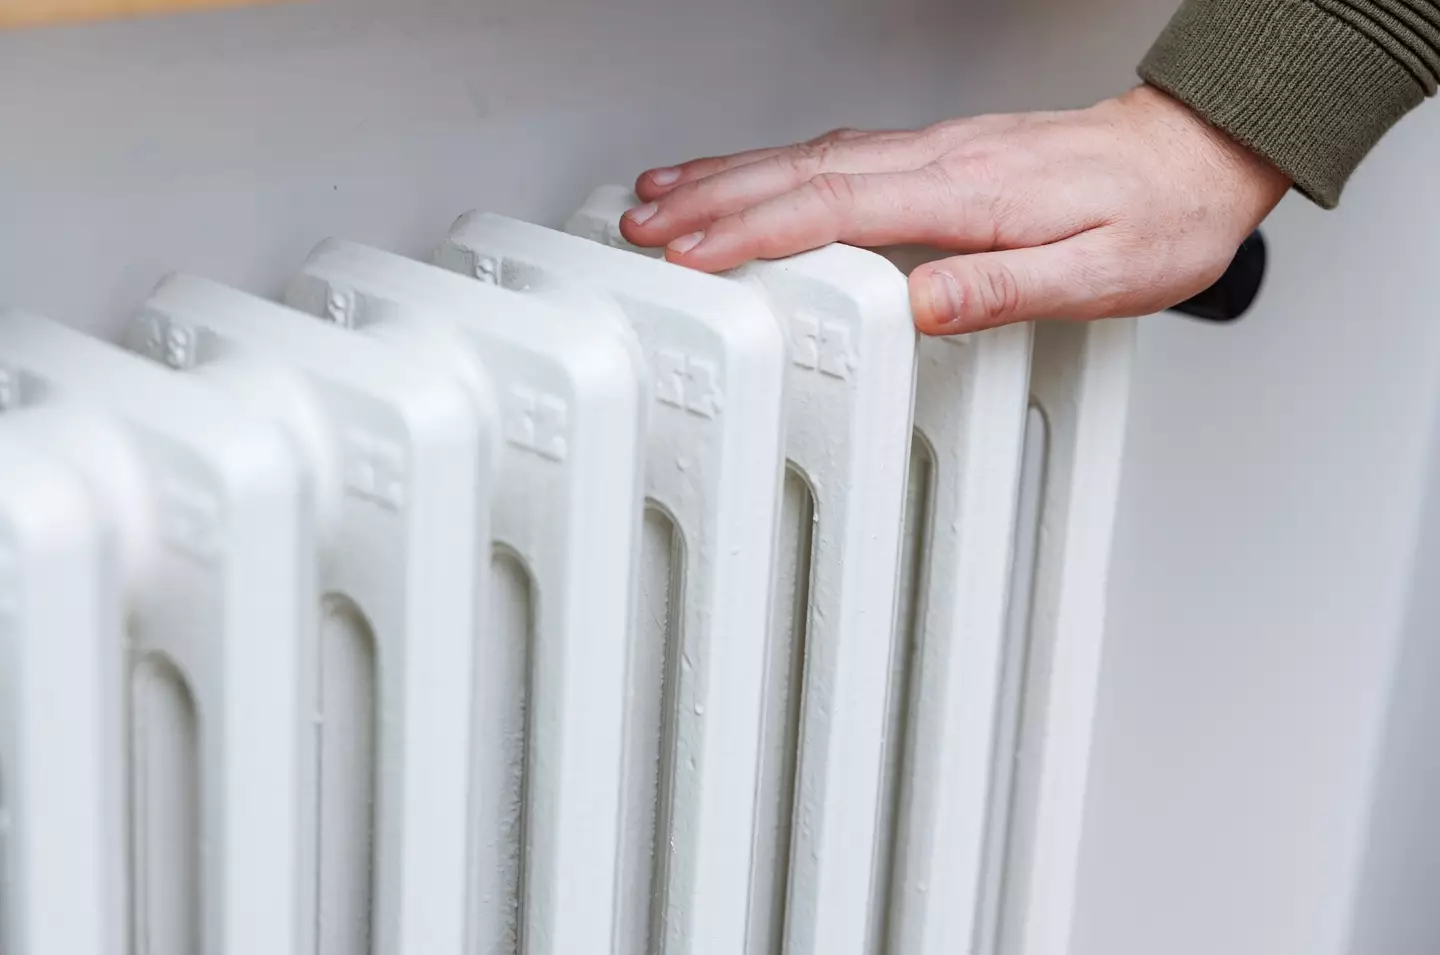 The experts recommend utilising the timer to make sure your house is warm without spending a fortune.